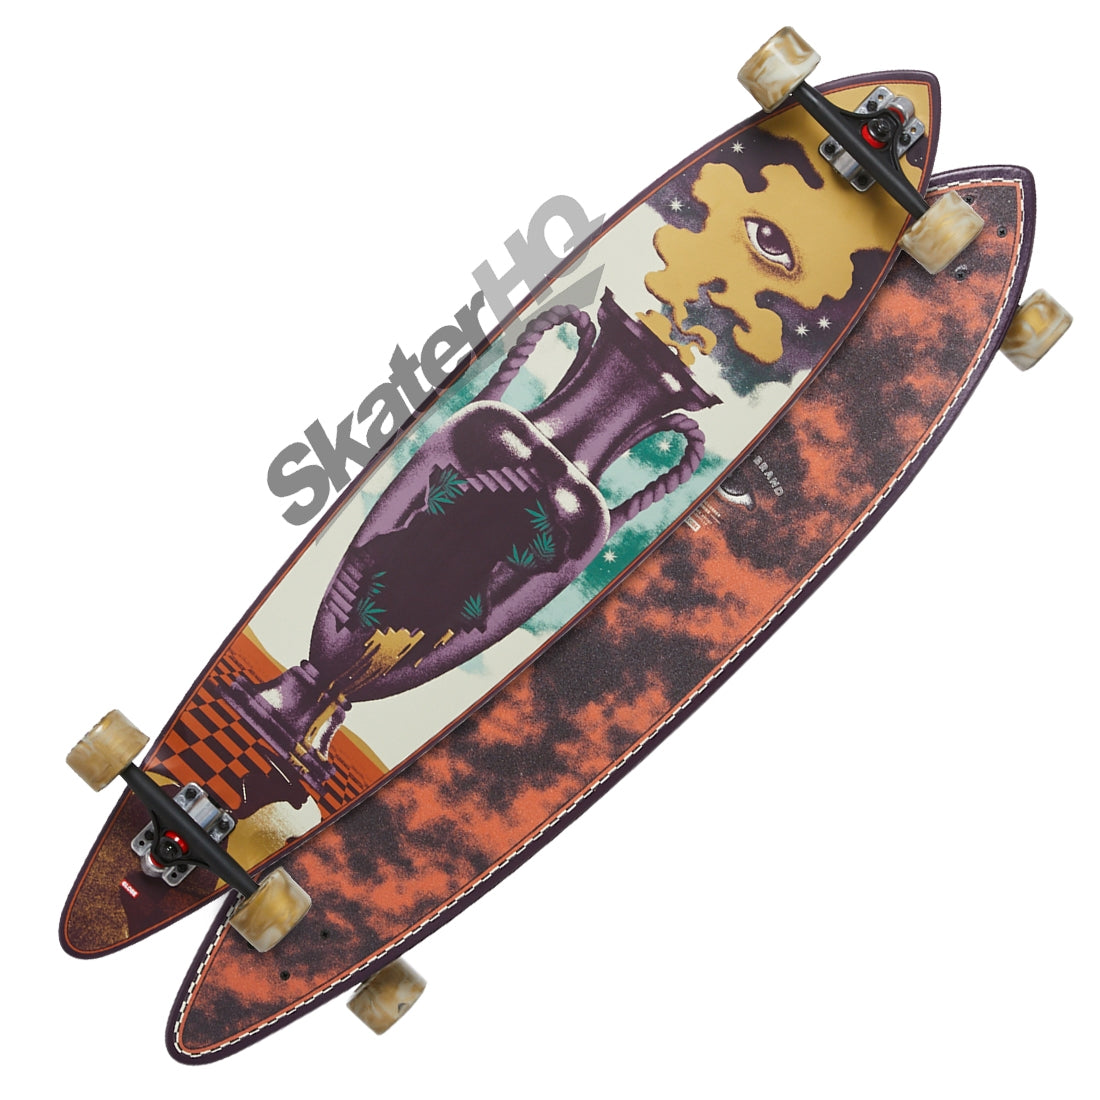 Globe Pintail 44 Complete - The Outpost Skateboard Completes Longboards